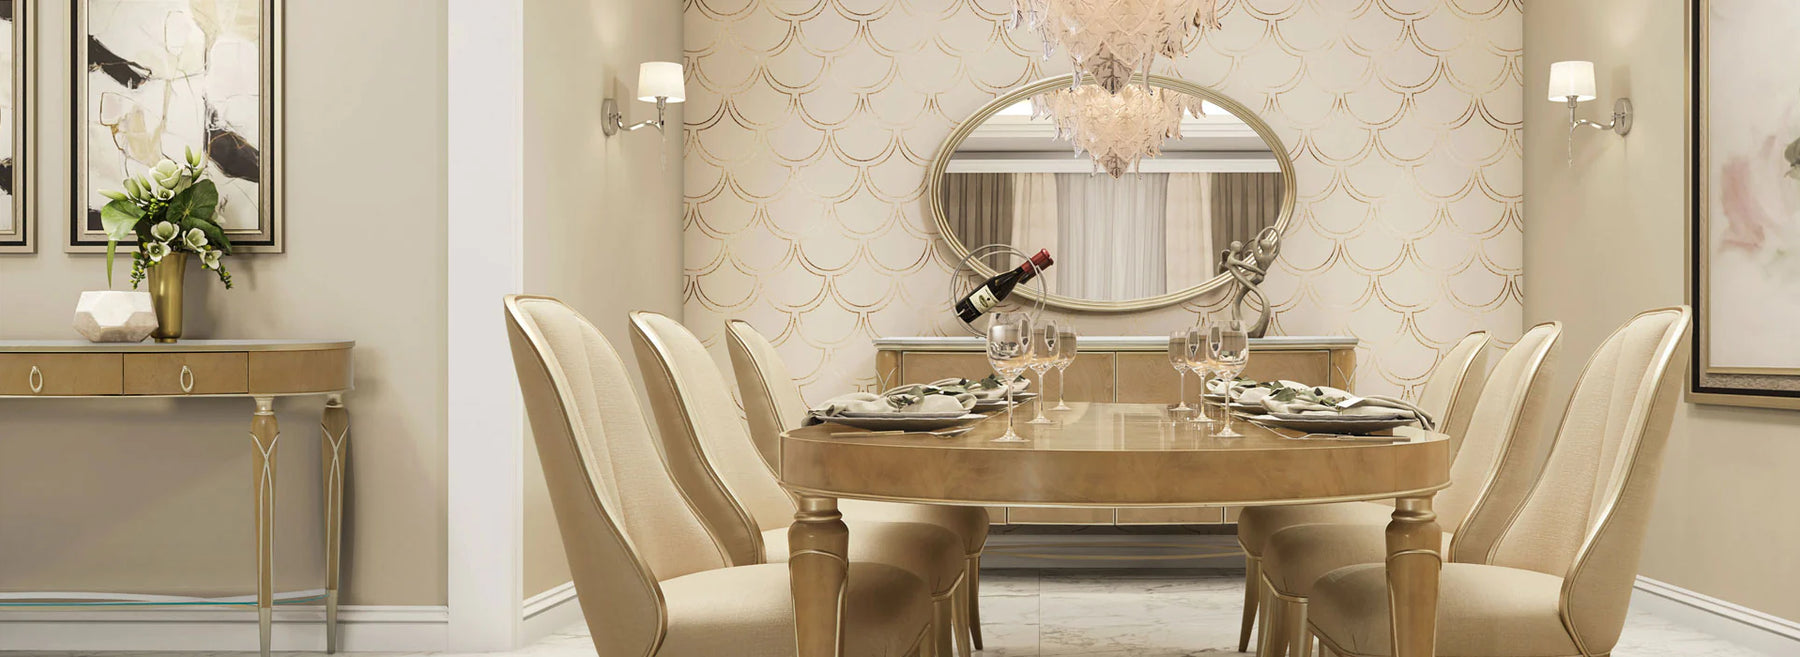 Creating a Timeless Dining Experience with Michael Amini